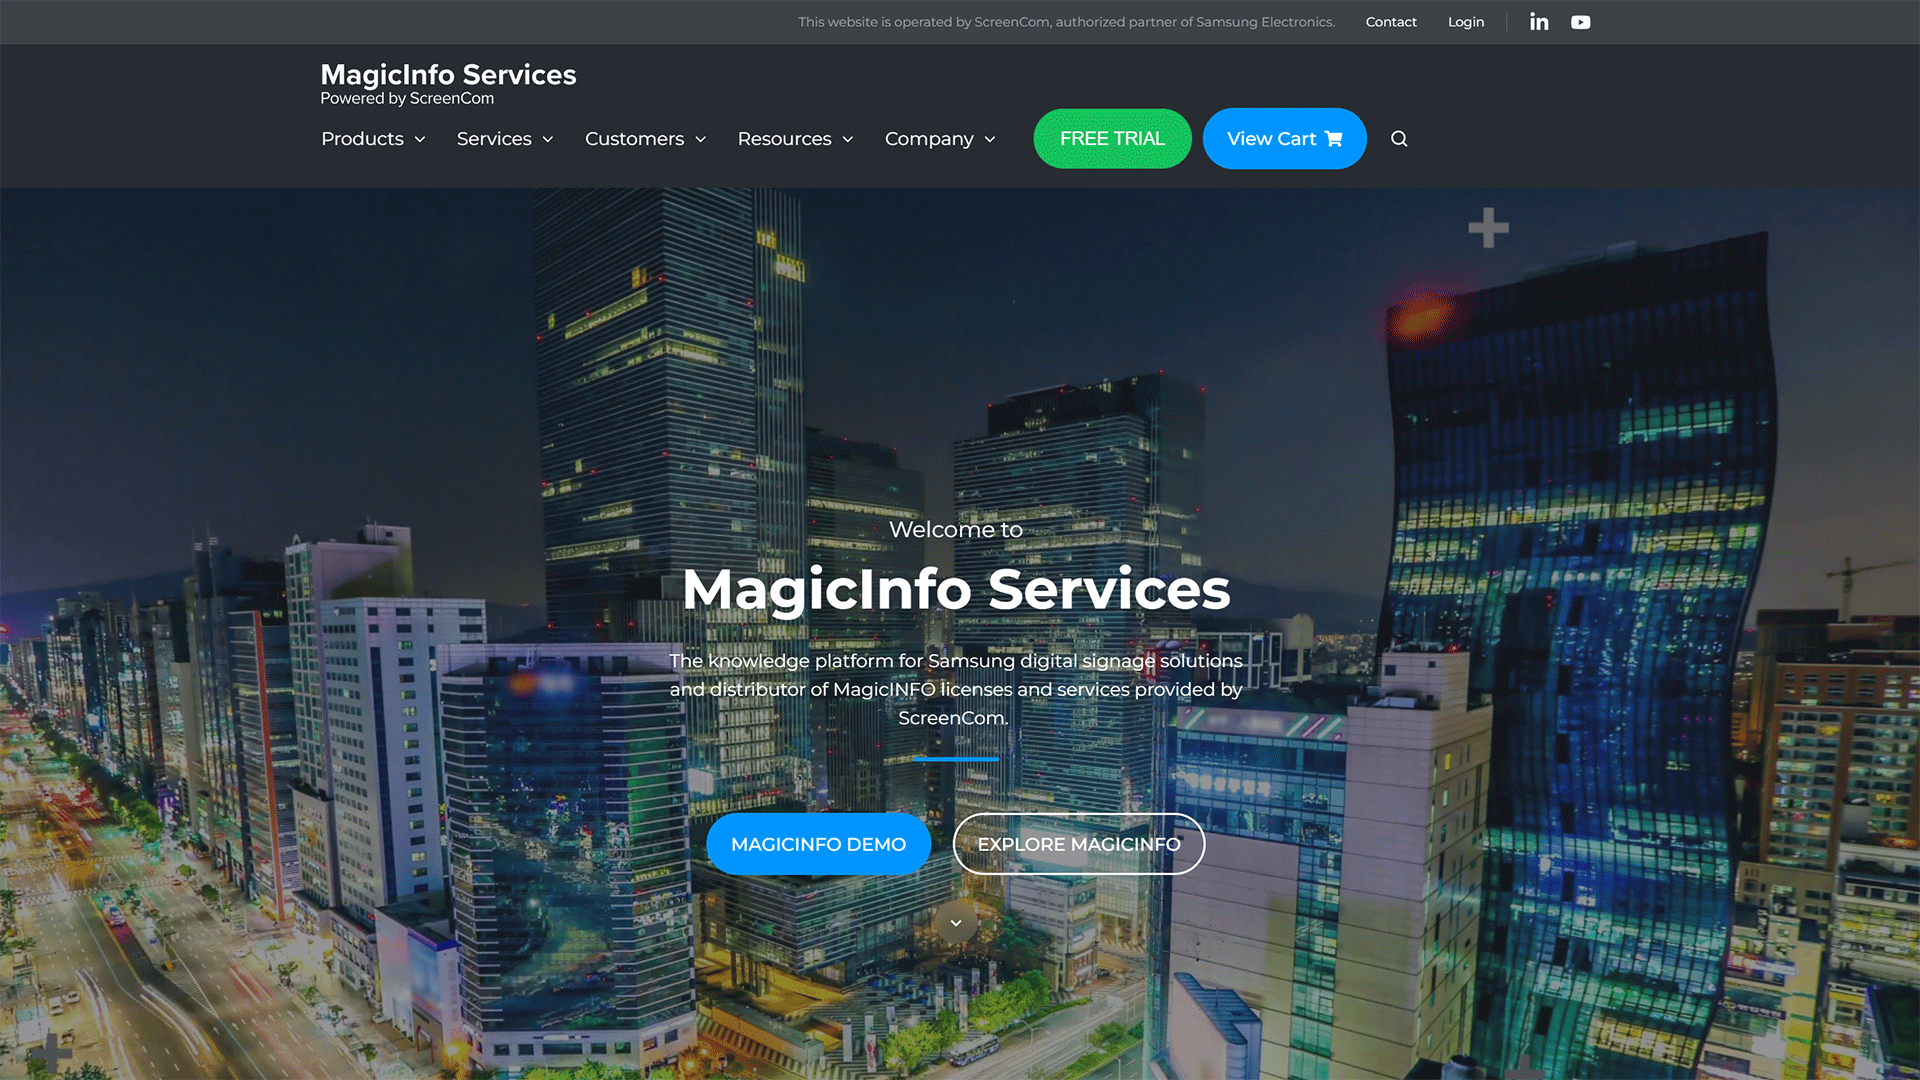 The beautiful magicinfoservices.com website created with Act3 on the HubSpot CMS